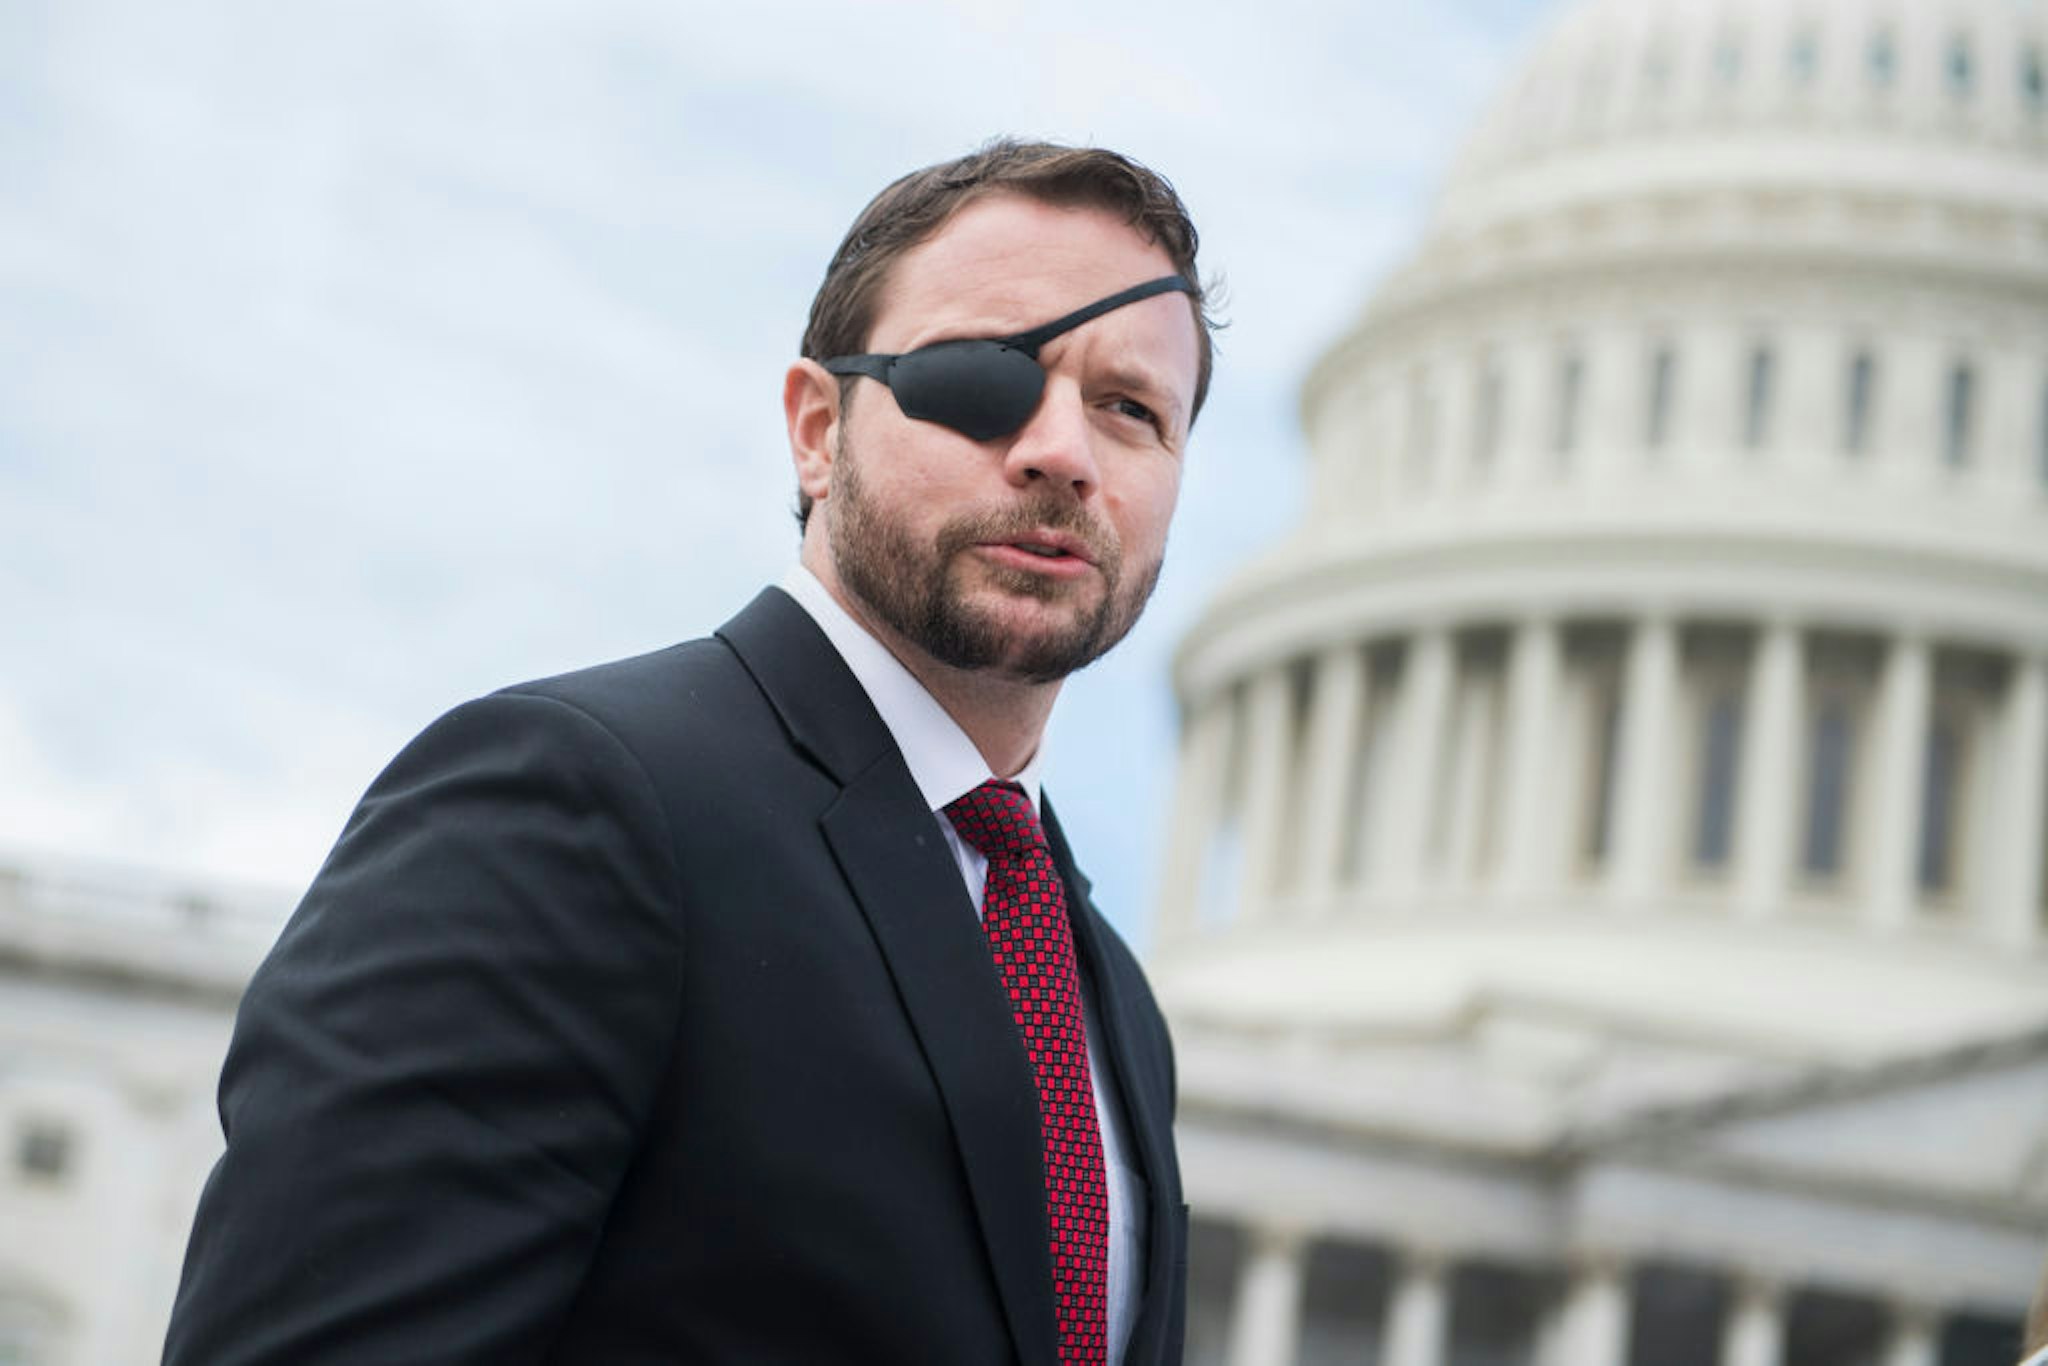 Rep.-elect Dan Crenshaw, R-Texas, is seen after the freshman class photo on the East Front of the Capitol on November 14, 2018. (Photo By Tom Williams/CQ Roll Call)